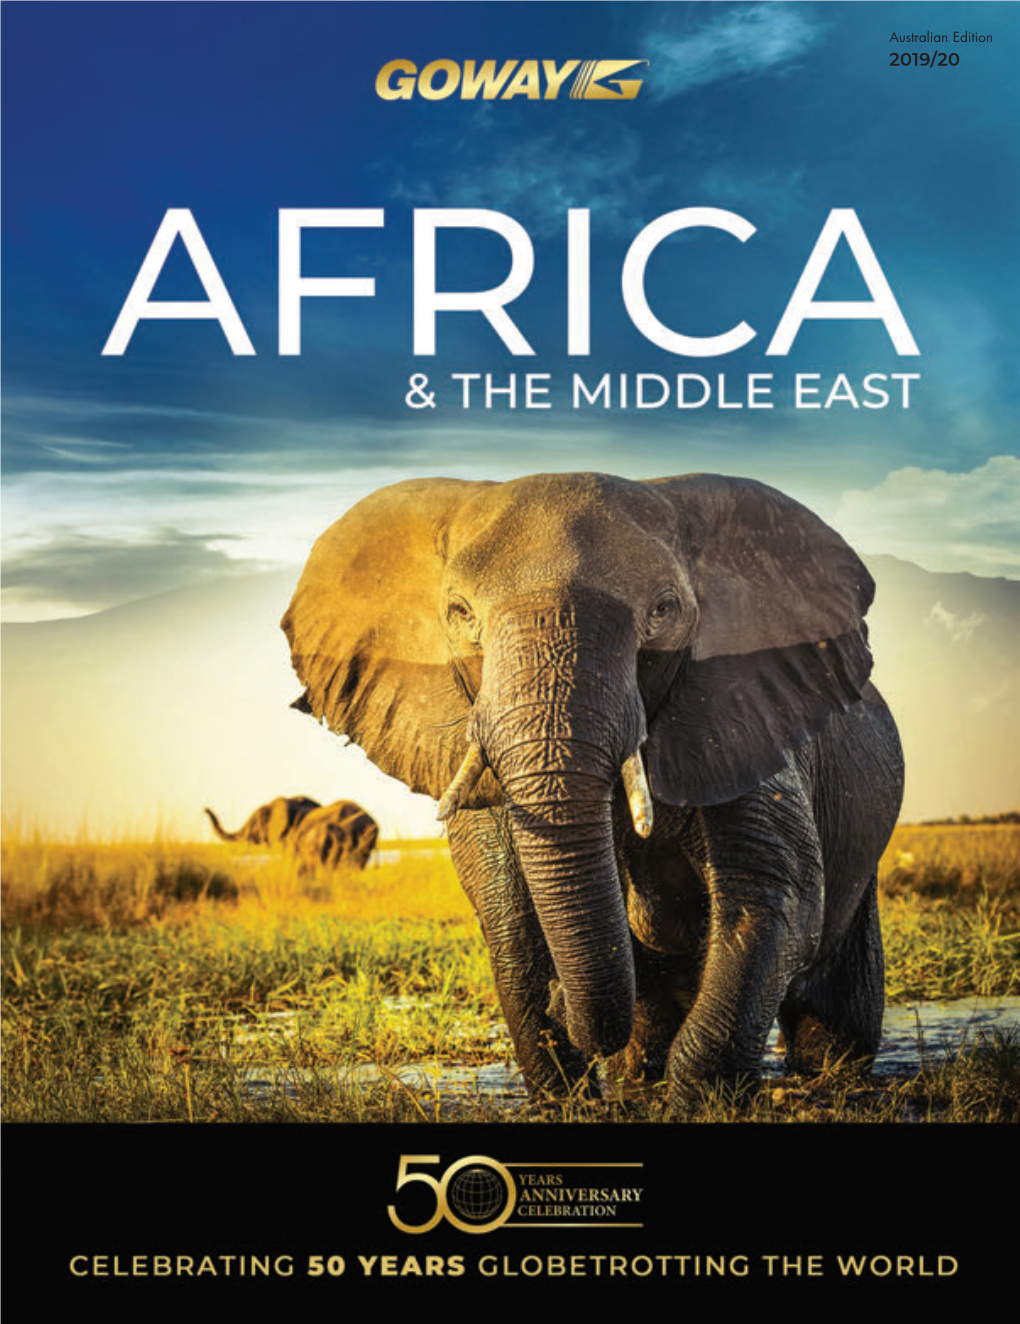 Australian Edition 2019/20 the Way to Africa & the Middle East